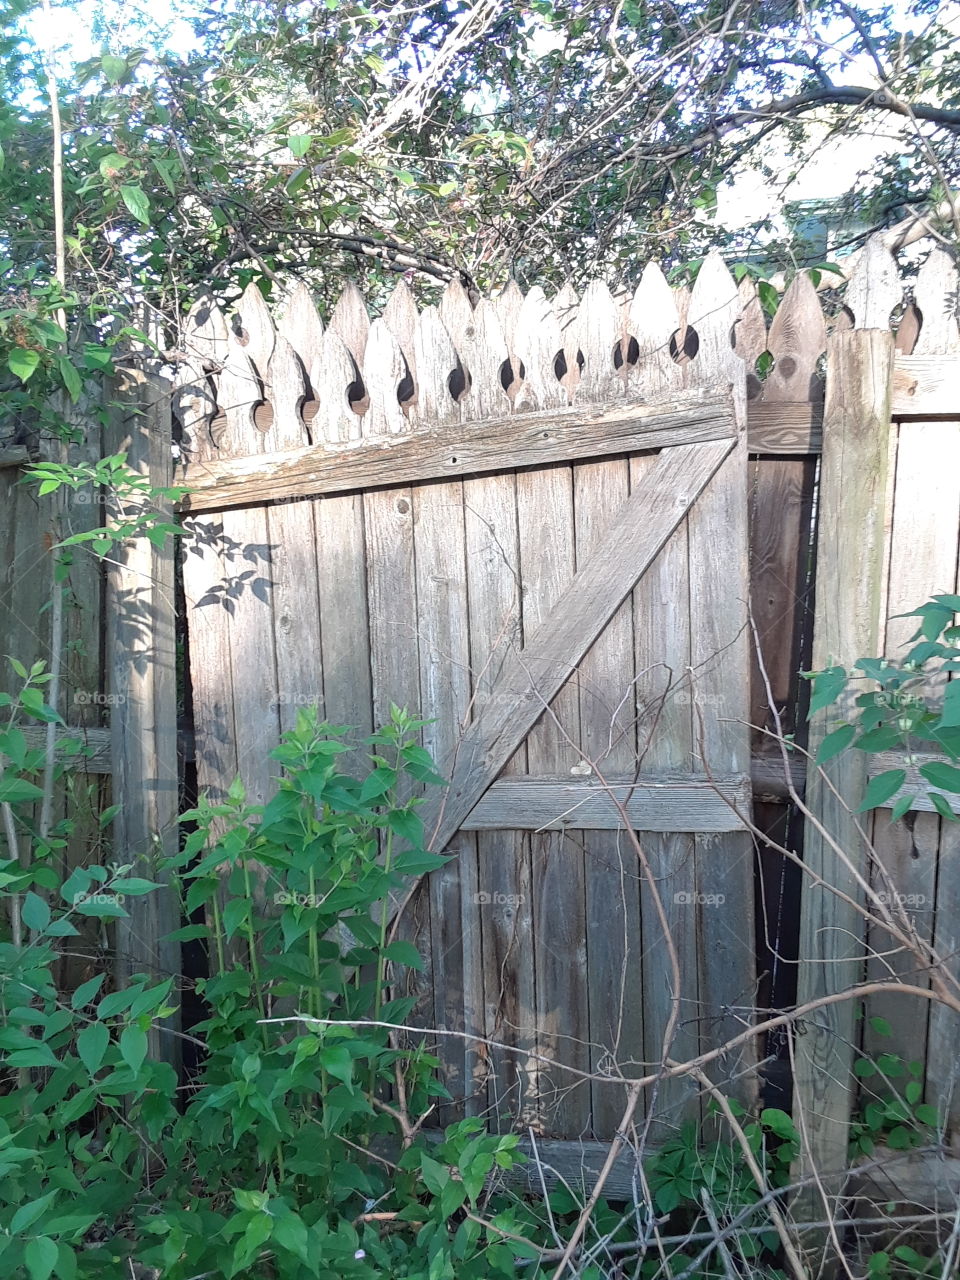 Old wooden fence with green weeds and over growth